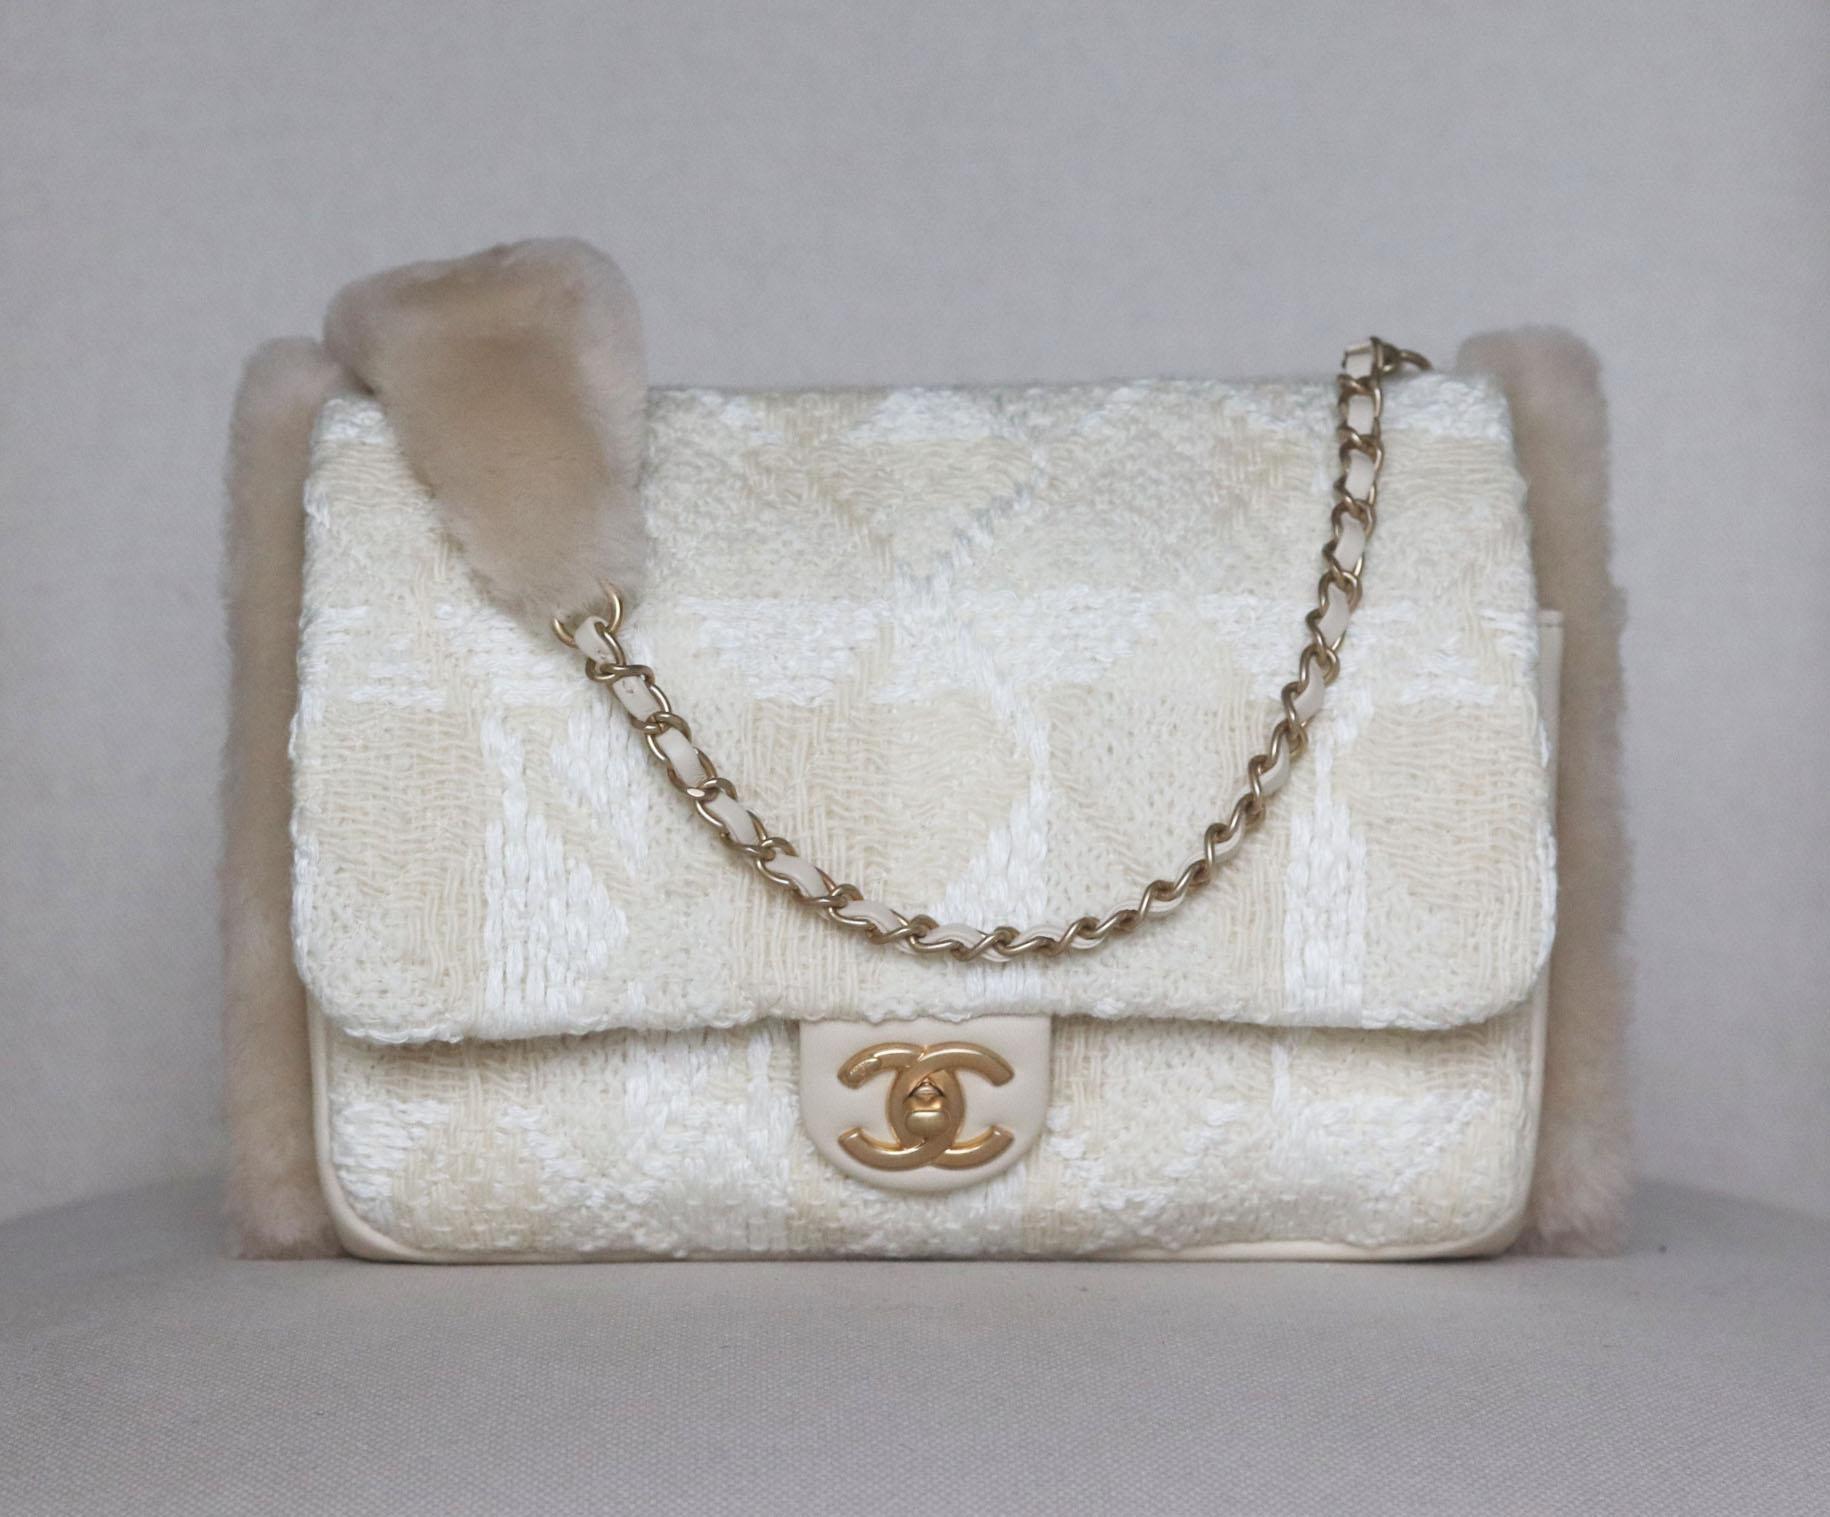 Chanel Shearling-Lined Tweed and Lambskin Muff Bag has been hand-finished by skilled artisans in the label's workshop, it is boasting a cream shearling-lined quilted cream and ivory tweed and lambskin exterior, this design is accented with antique